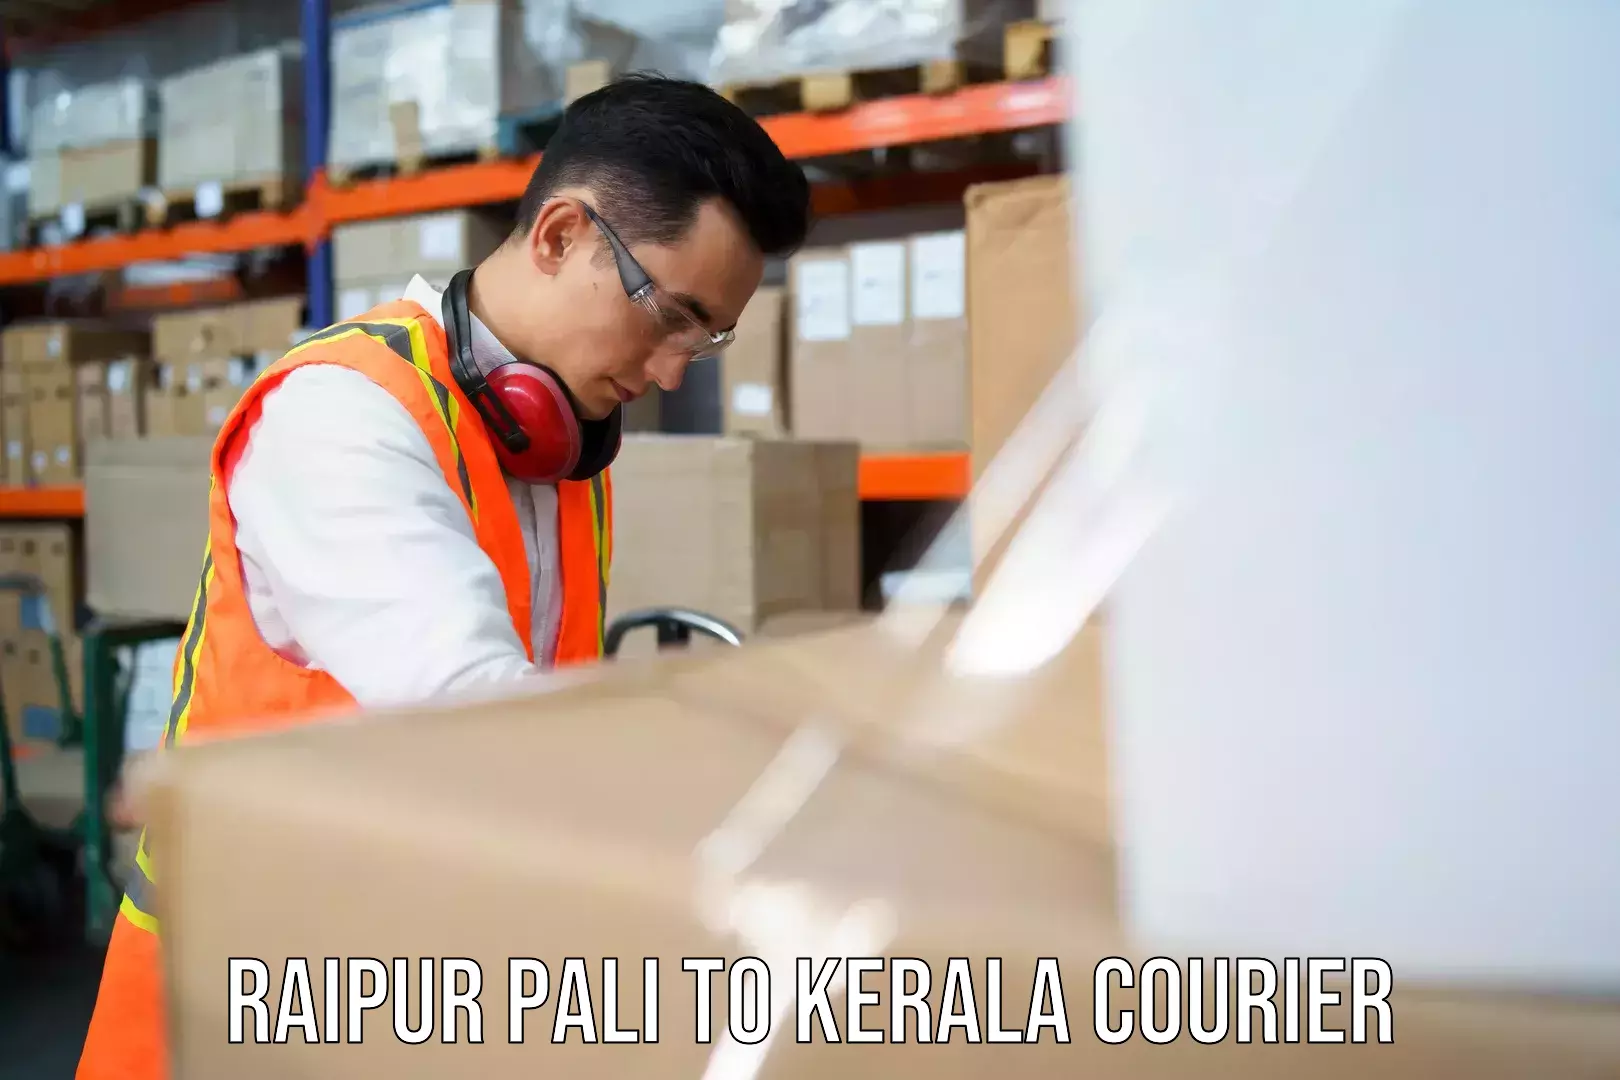 Customer-friendly courier services Raipur Pali to Kerala